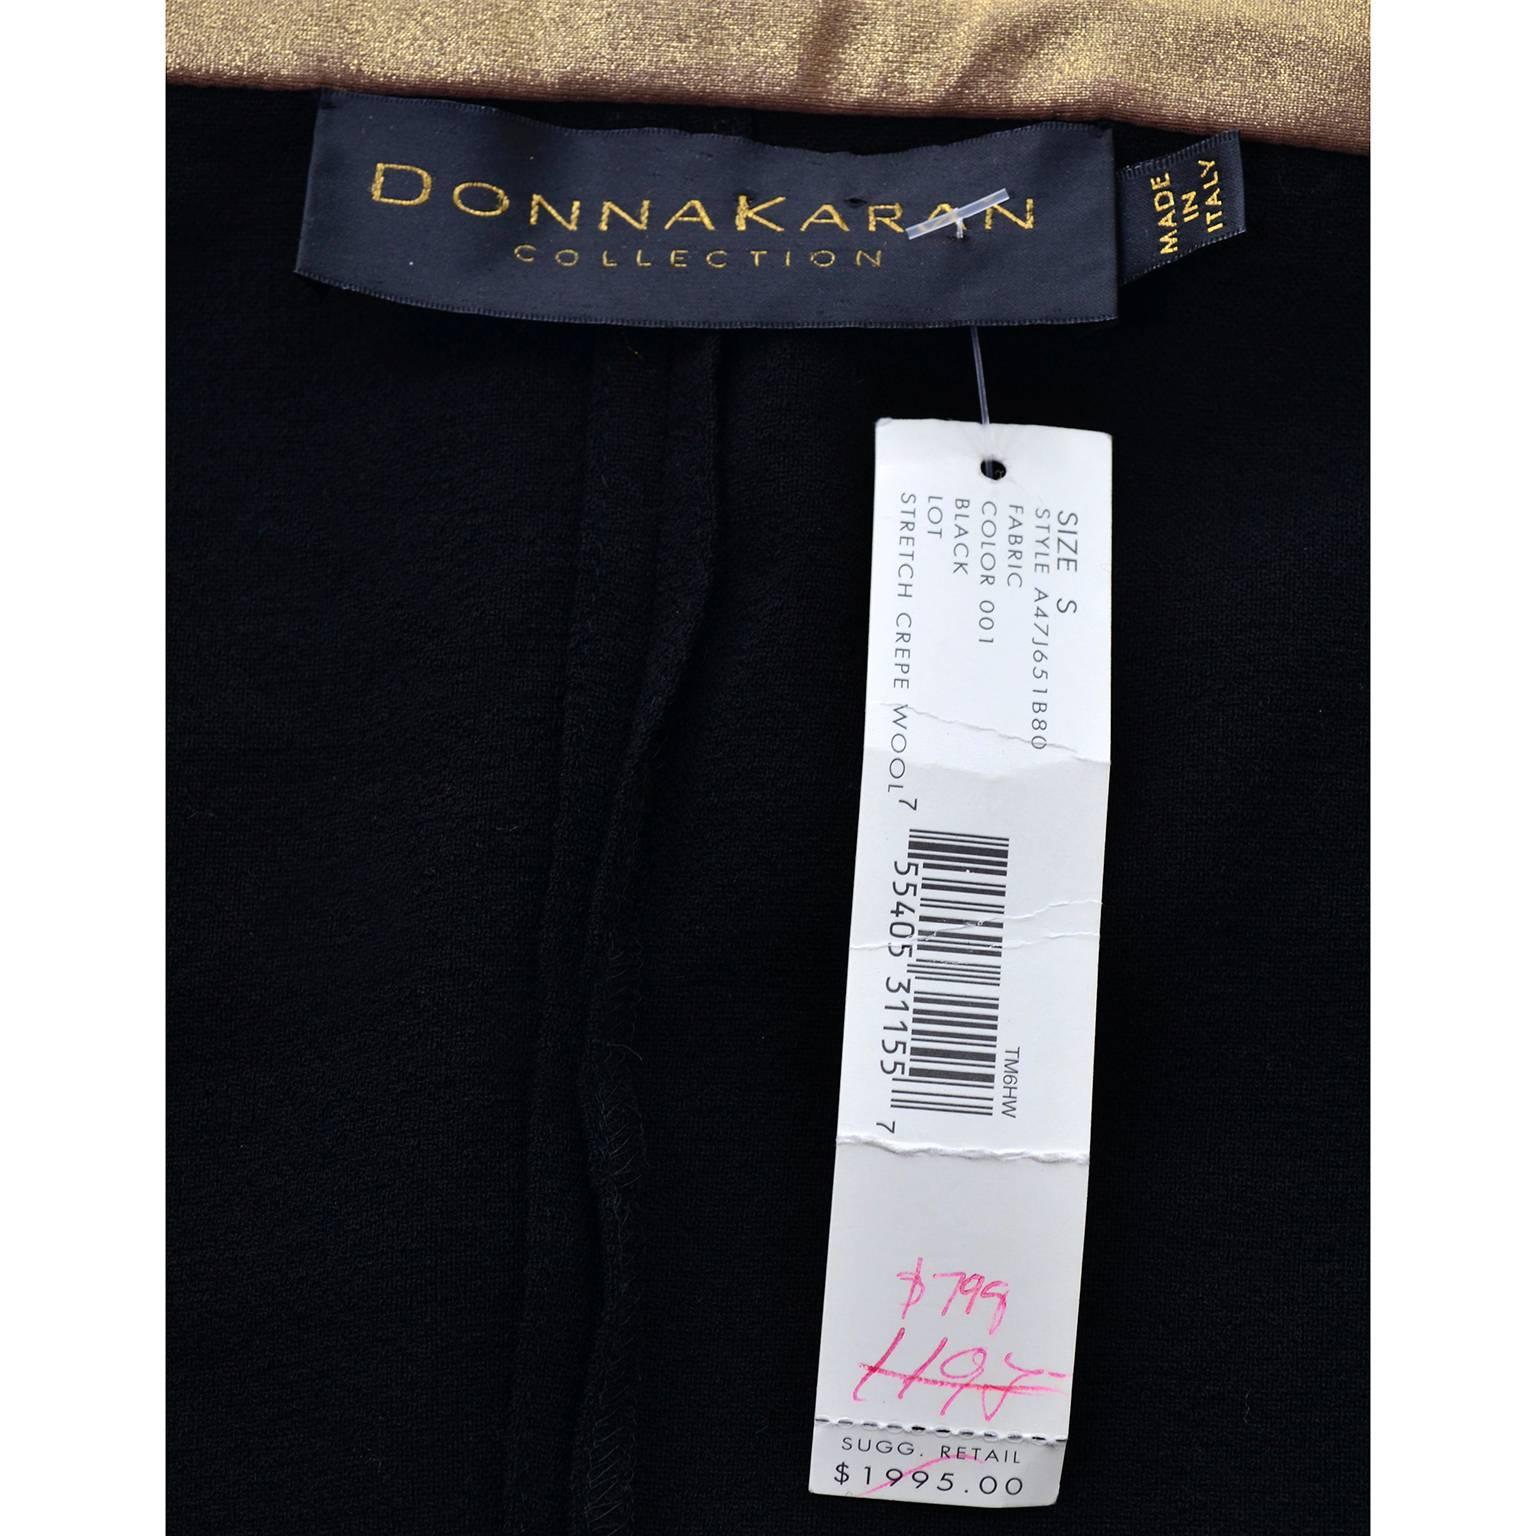 Donna Karan Black Stretch Crepe Wool Vintage Wrap Top with Gold Trim NWT Small 2